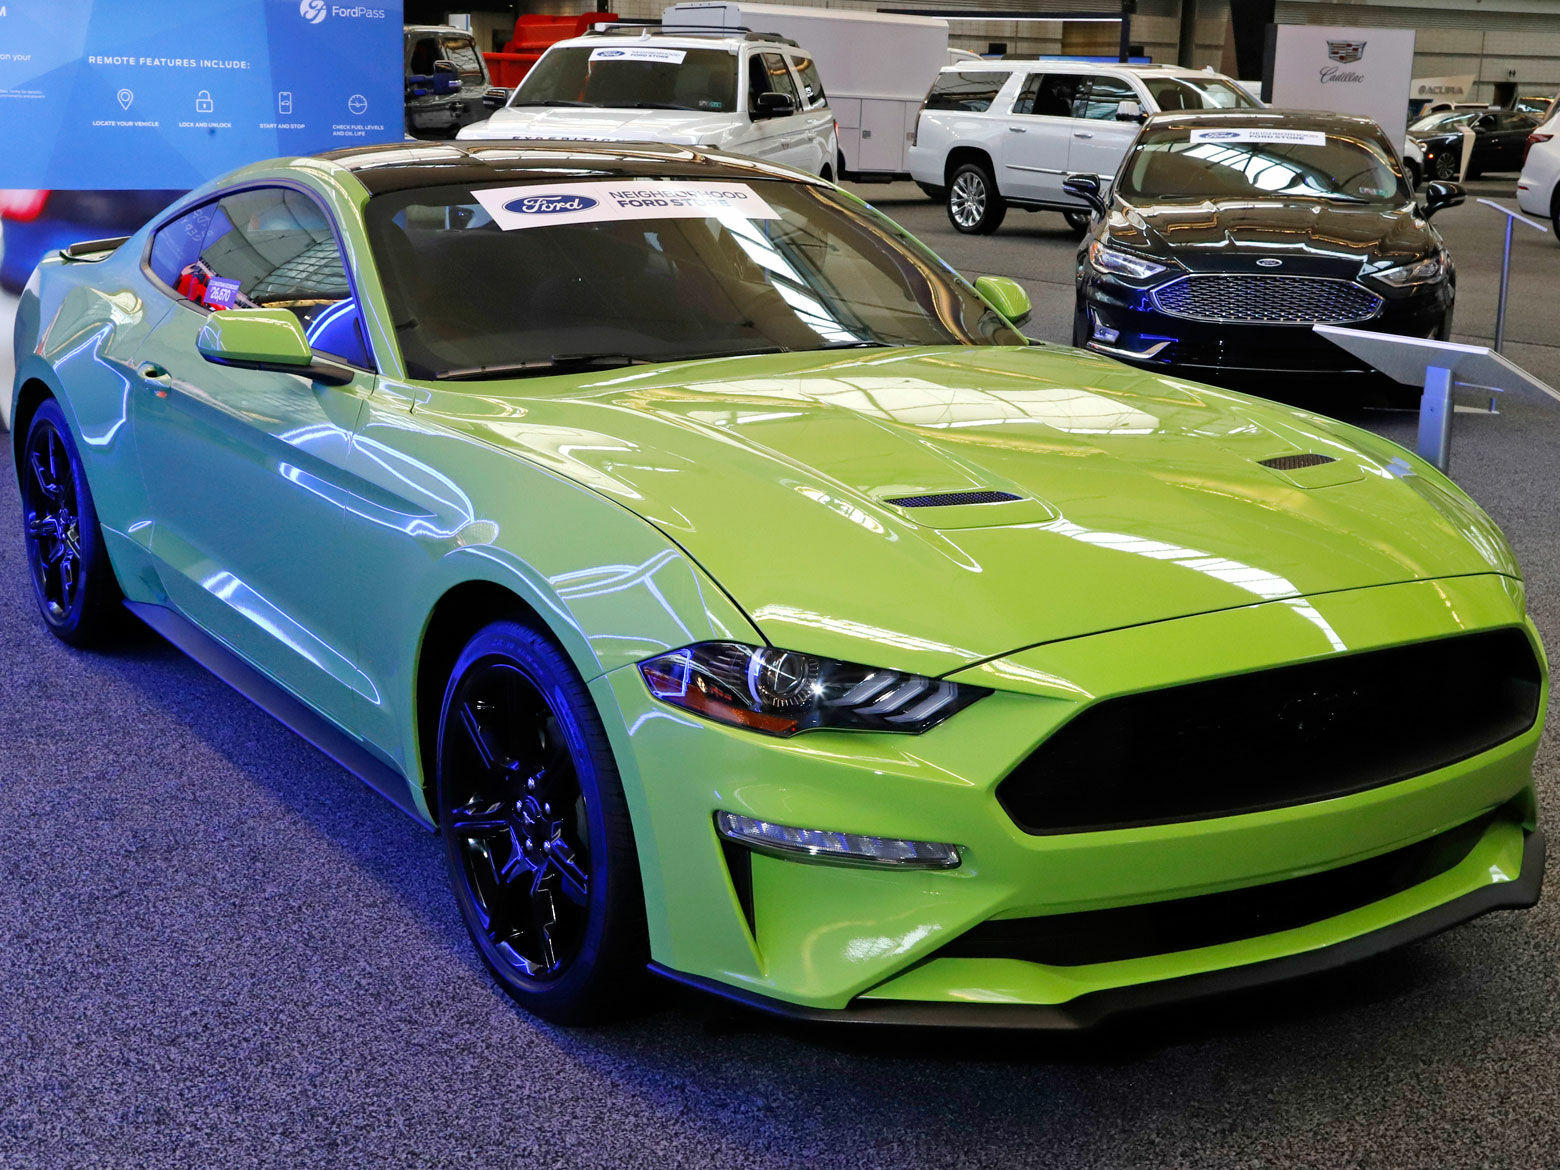 <h3><strong>2020 Ford Mustang</strong></h3>
<p><strong>Purchase Deal: 0% financing for 60 months</strong></p>
<p>There’s nothing much more patriotic than rolling to a barbecue in a new <a href="https://cars.usnews.com/cars-trucks/ford/mustang">2020 Ford Mustang</a>. One of America’s quintessential muscle cars, the Mustang is available in coupe and convertible models, with power output ranging from merely potent to incredibly powerful. It’s the top-rated model in our <a href="https://cars.usnews.com/cars-trucks/rankings/sports-cars">ranking of sports cars</a>.</p>
<p>In most areas of the country, Ford is offering a five-year zero percent financing deal on most Mustang models this Independence Day. Compared to paying a market interest rate, the no-cost financing offer will save you thousands of dollars over the life of the loan. Of course, an excellent credit score is required to take advantage of the Mustang deal.</p>
<p>In addition to its wide array of available engines, the 2020 Mustang features agile handling and a high-quality cabin outfitted with heritage touches. While base models are pretty bare-boned, upgrading a trim level gets you features such as Ford’s intuitive SYNC 3 infotainment system.</p>
